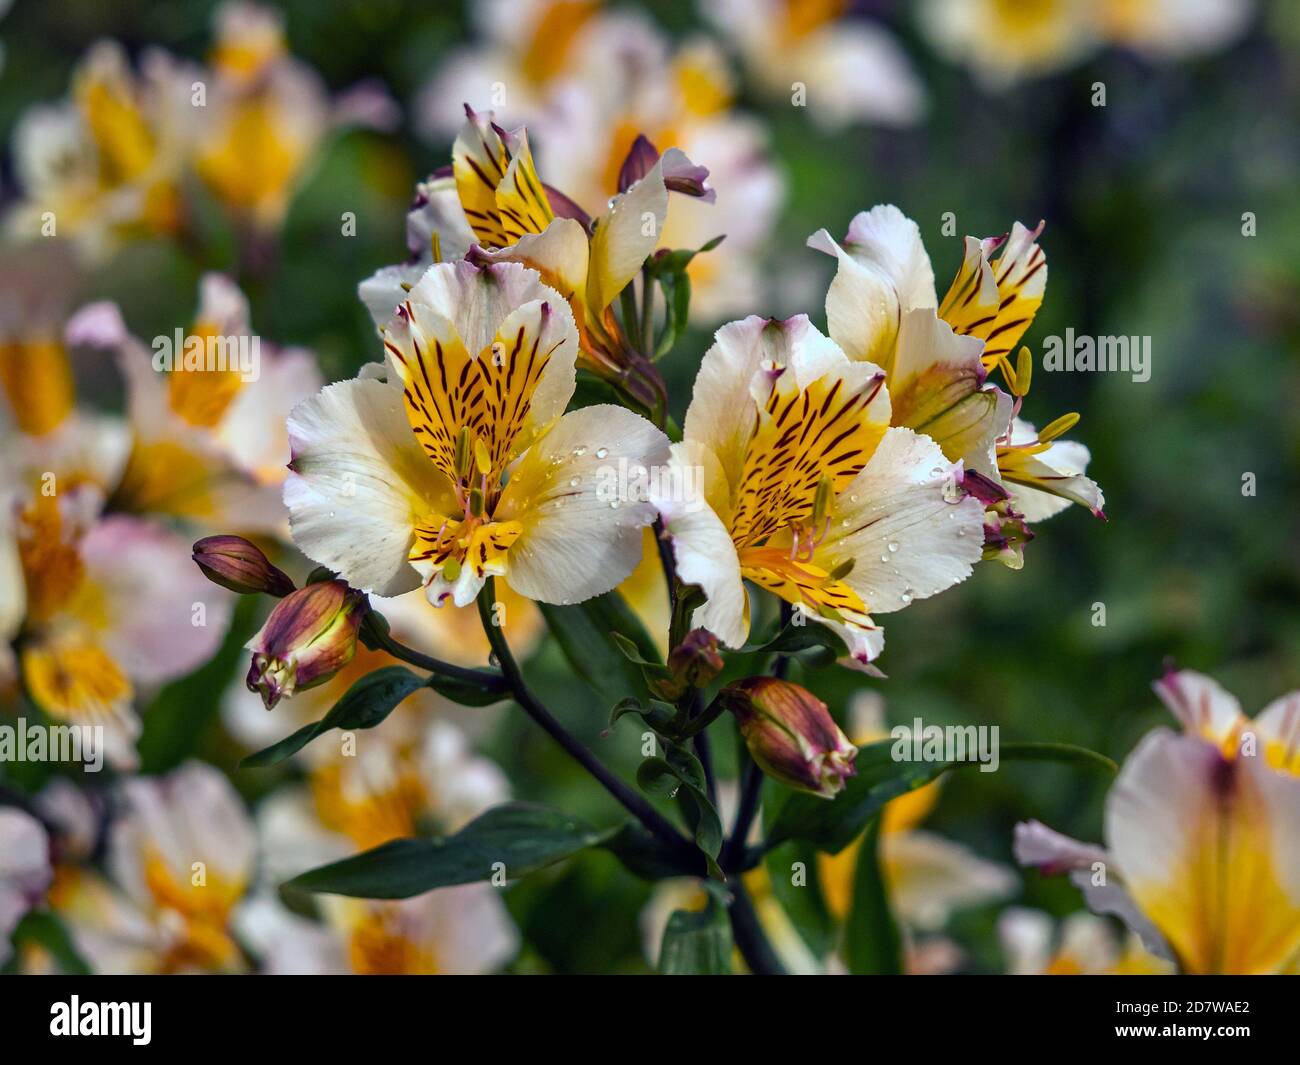 Pretty Peruvian lily flowers, Alstroemeria, also known as Lily of the Incas, variety Aimi Stock Photo